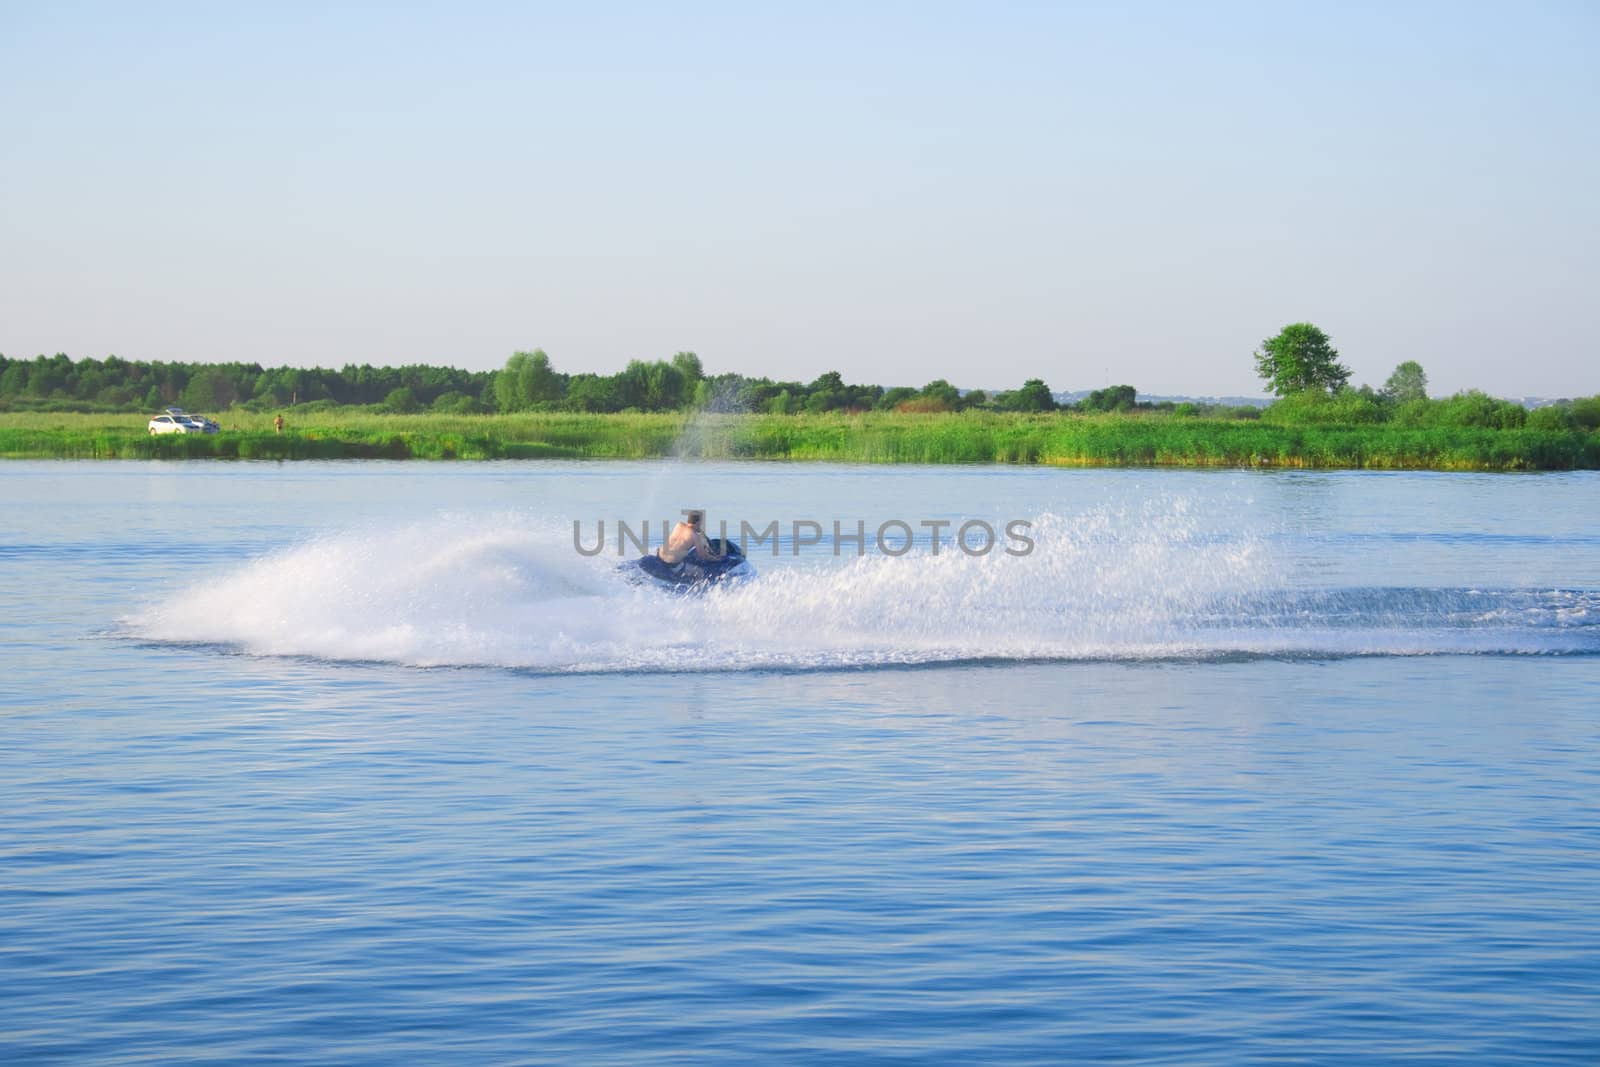 The man goes for a drive on a hydromotorcycle on lake, doing waves